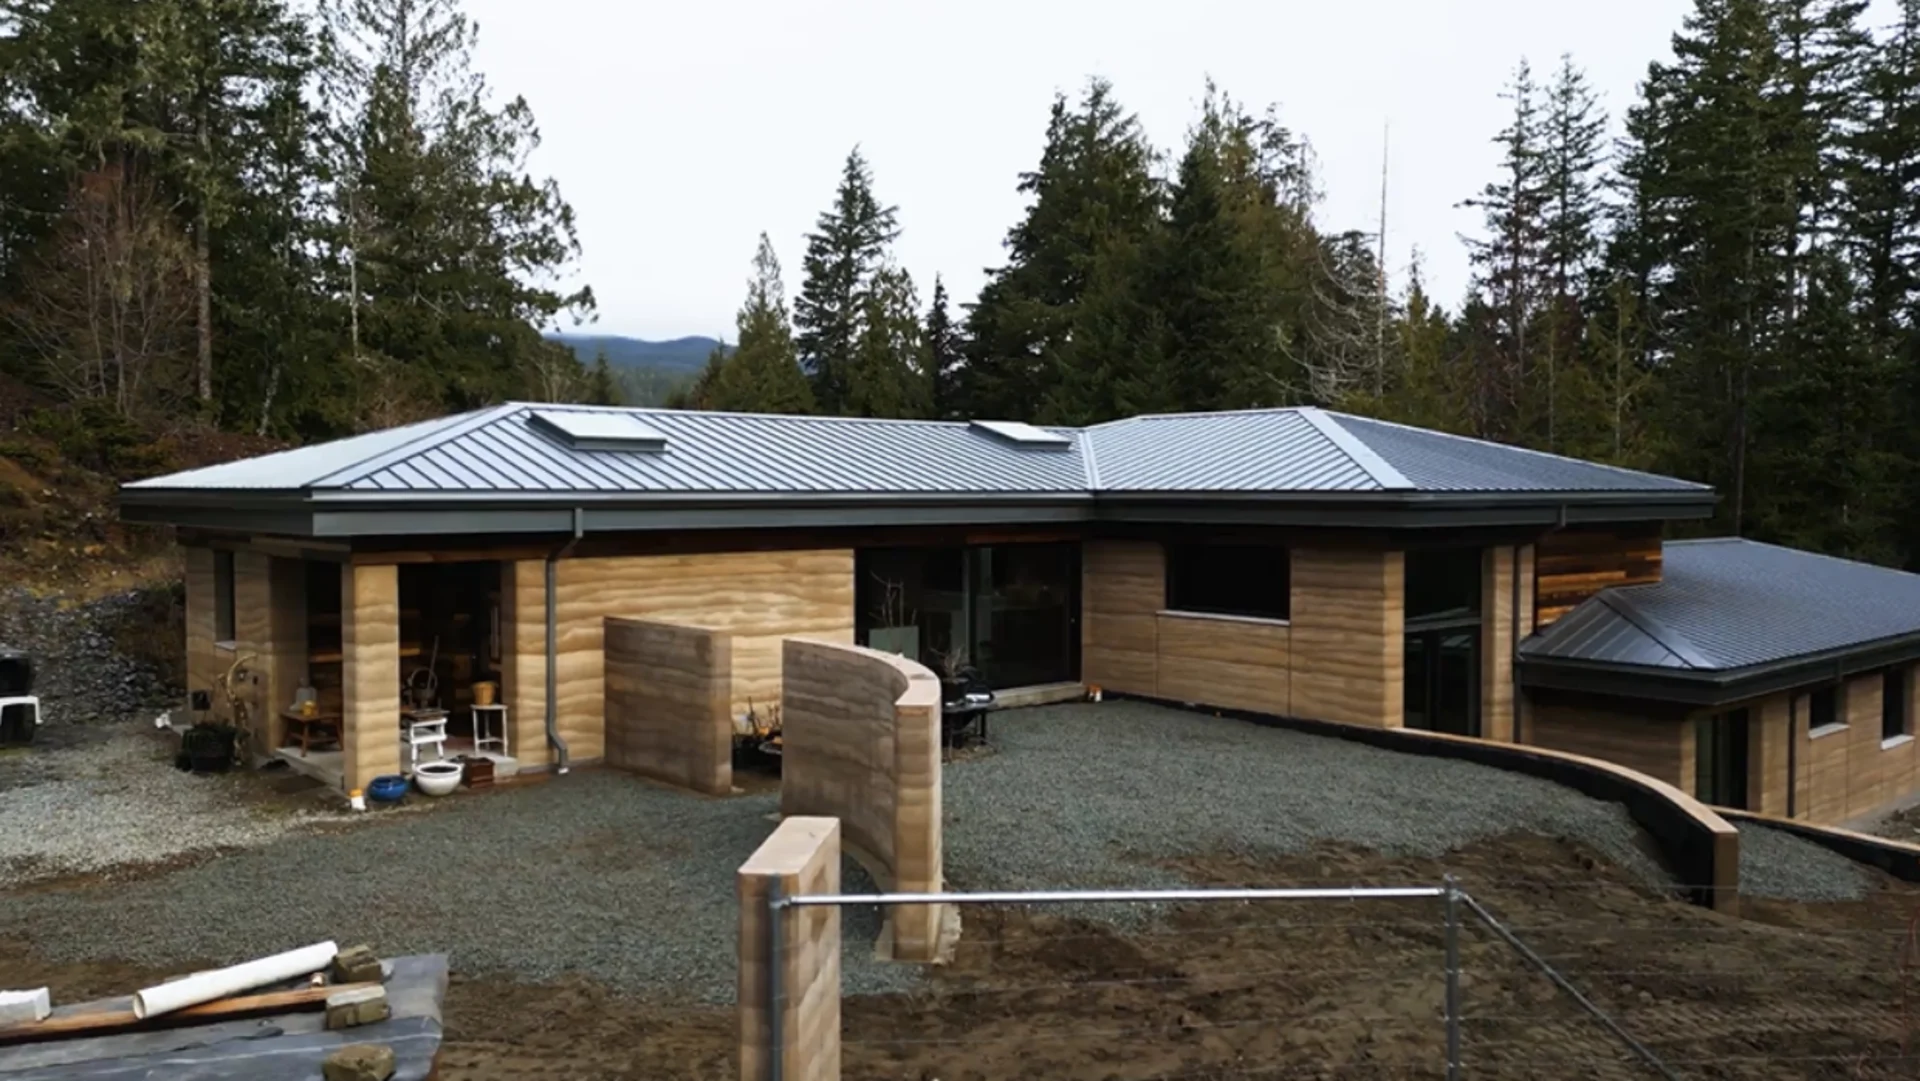 Rammed Earth Home: Building Better (The Weather Network) | Rammed Earth House, Sooke, British Columbia